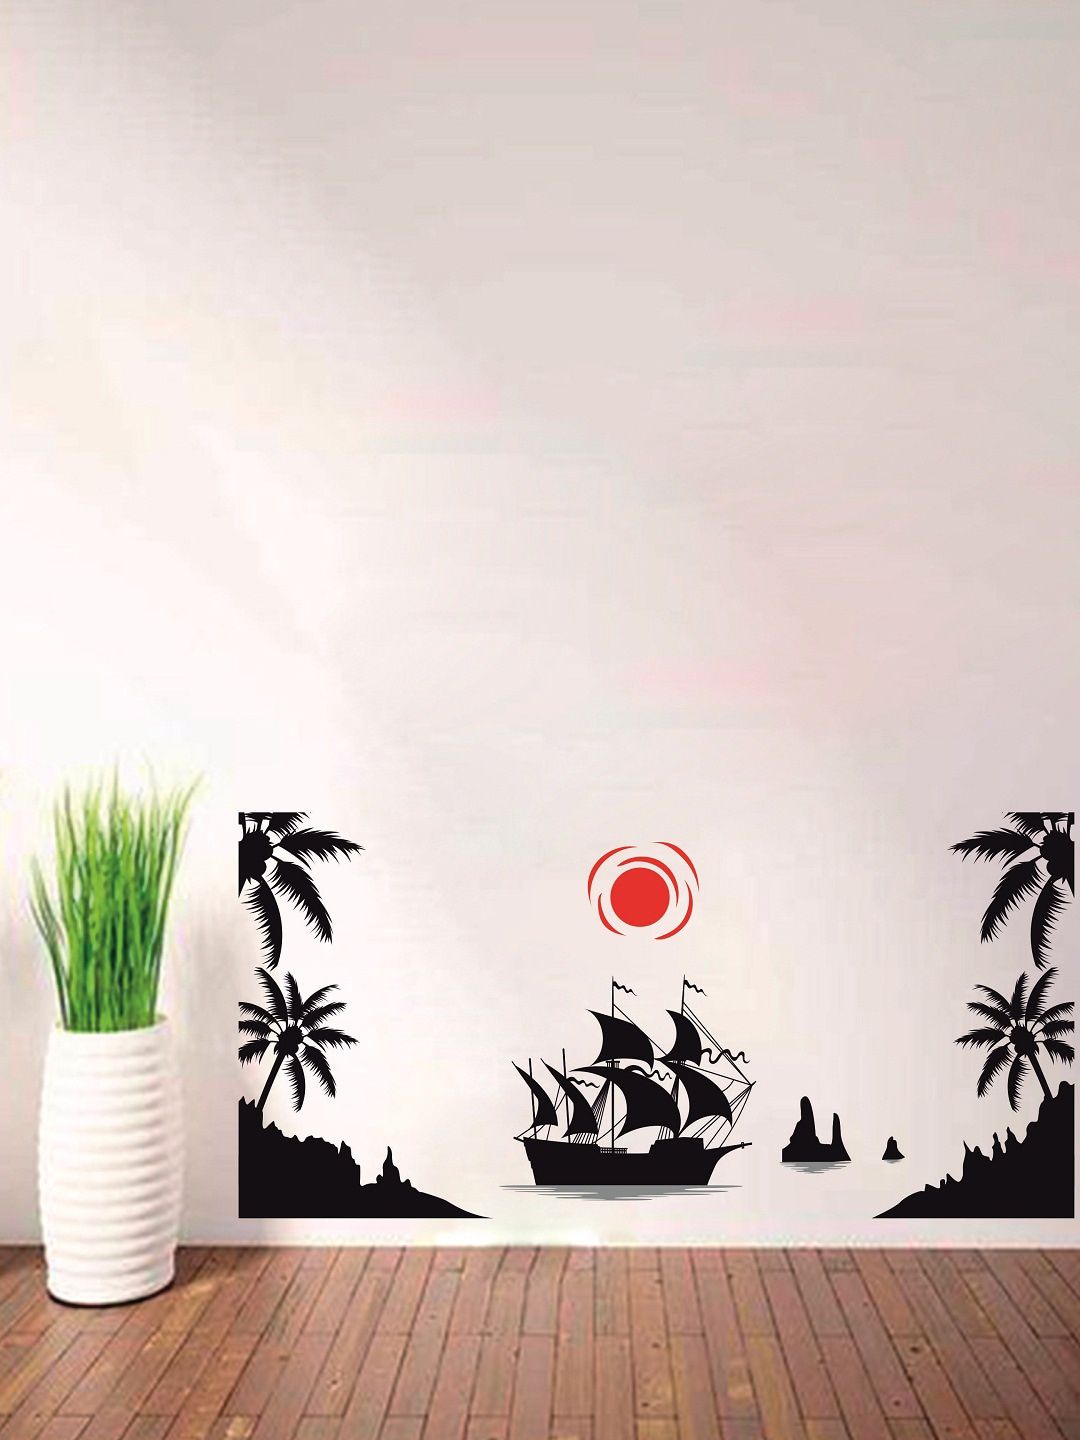 WALLSTICK Black Large Vinyl Wall Stickers Price in India